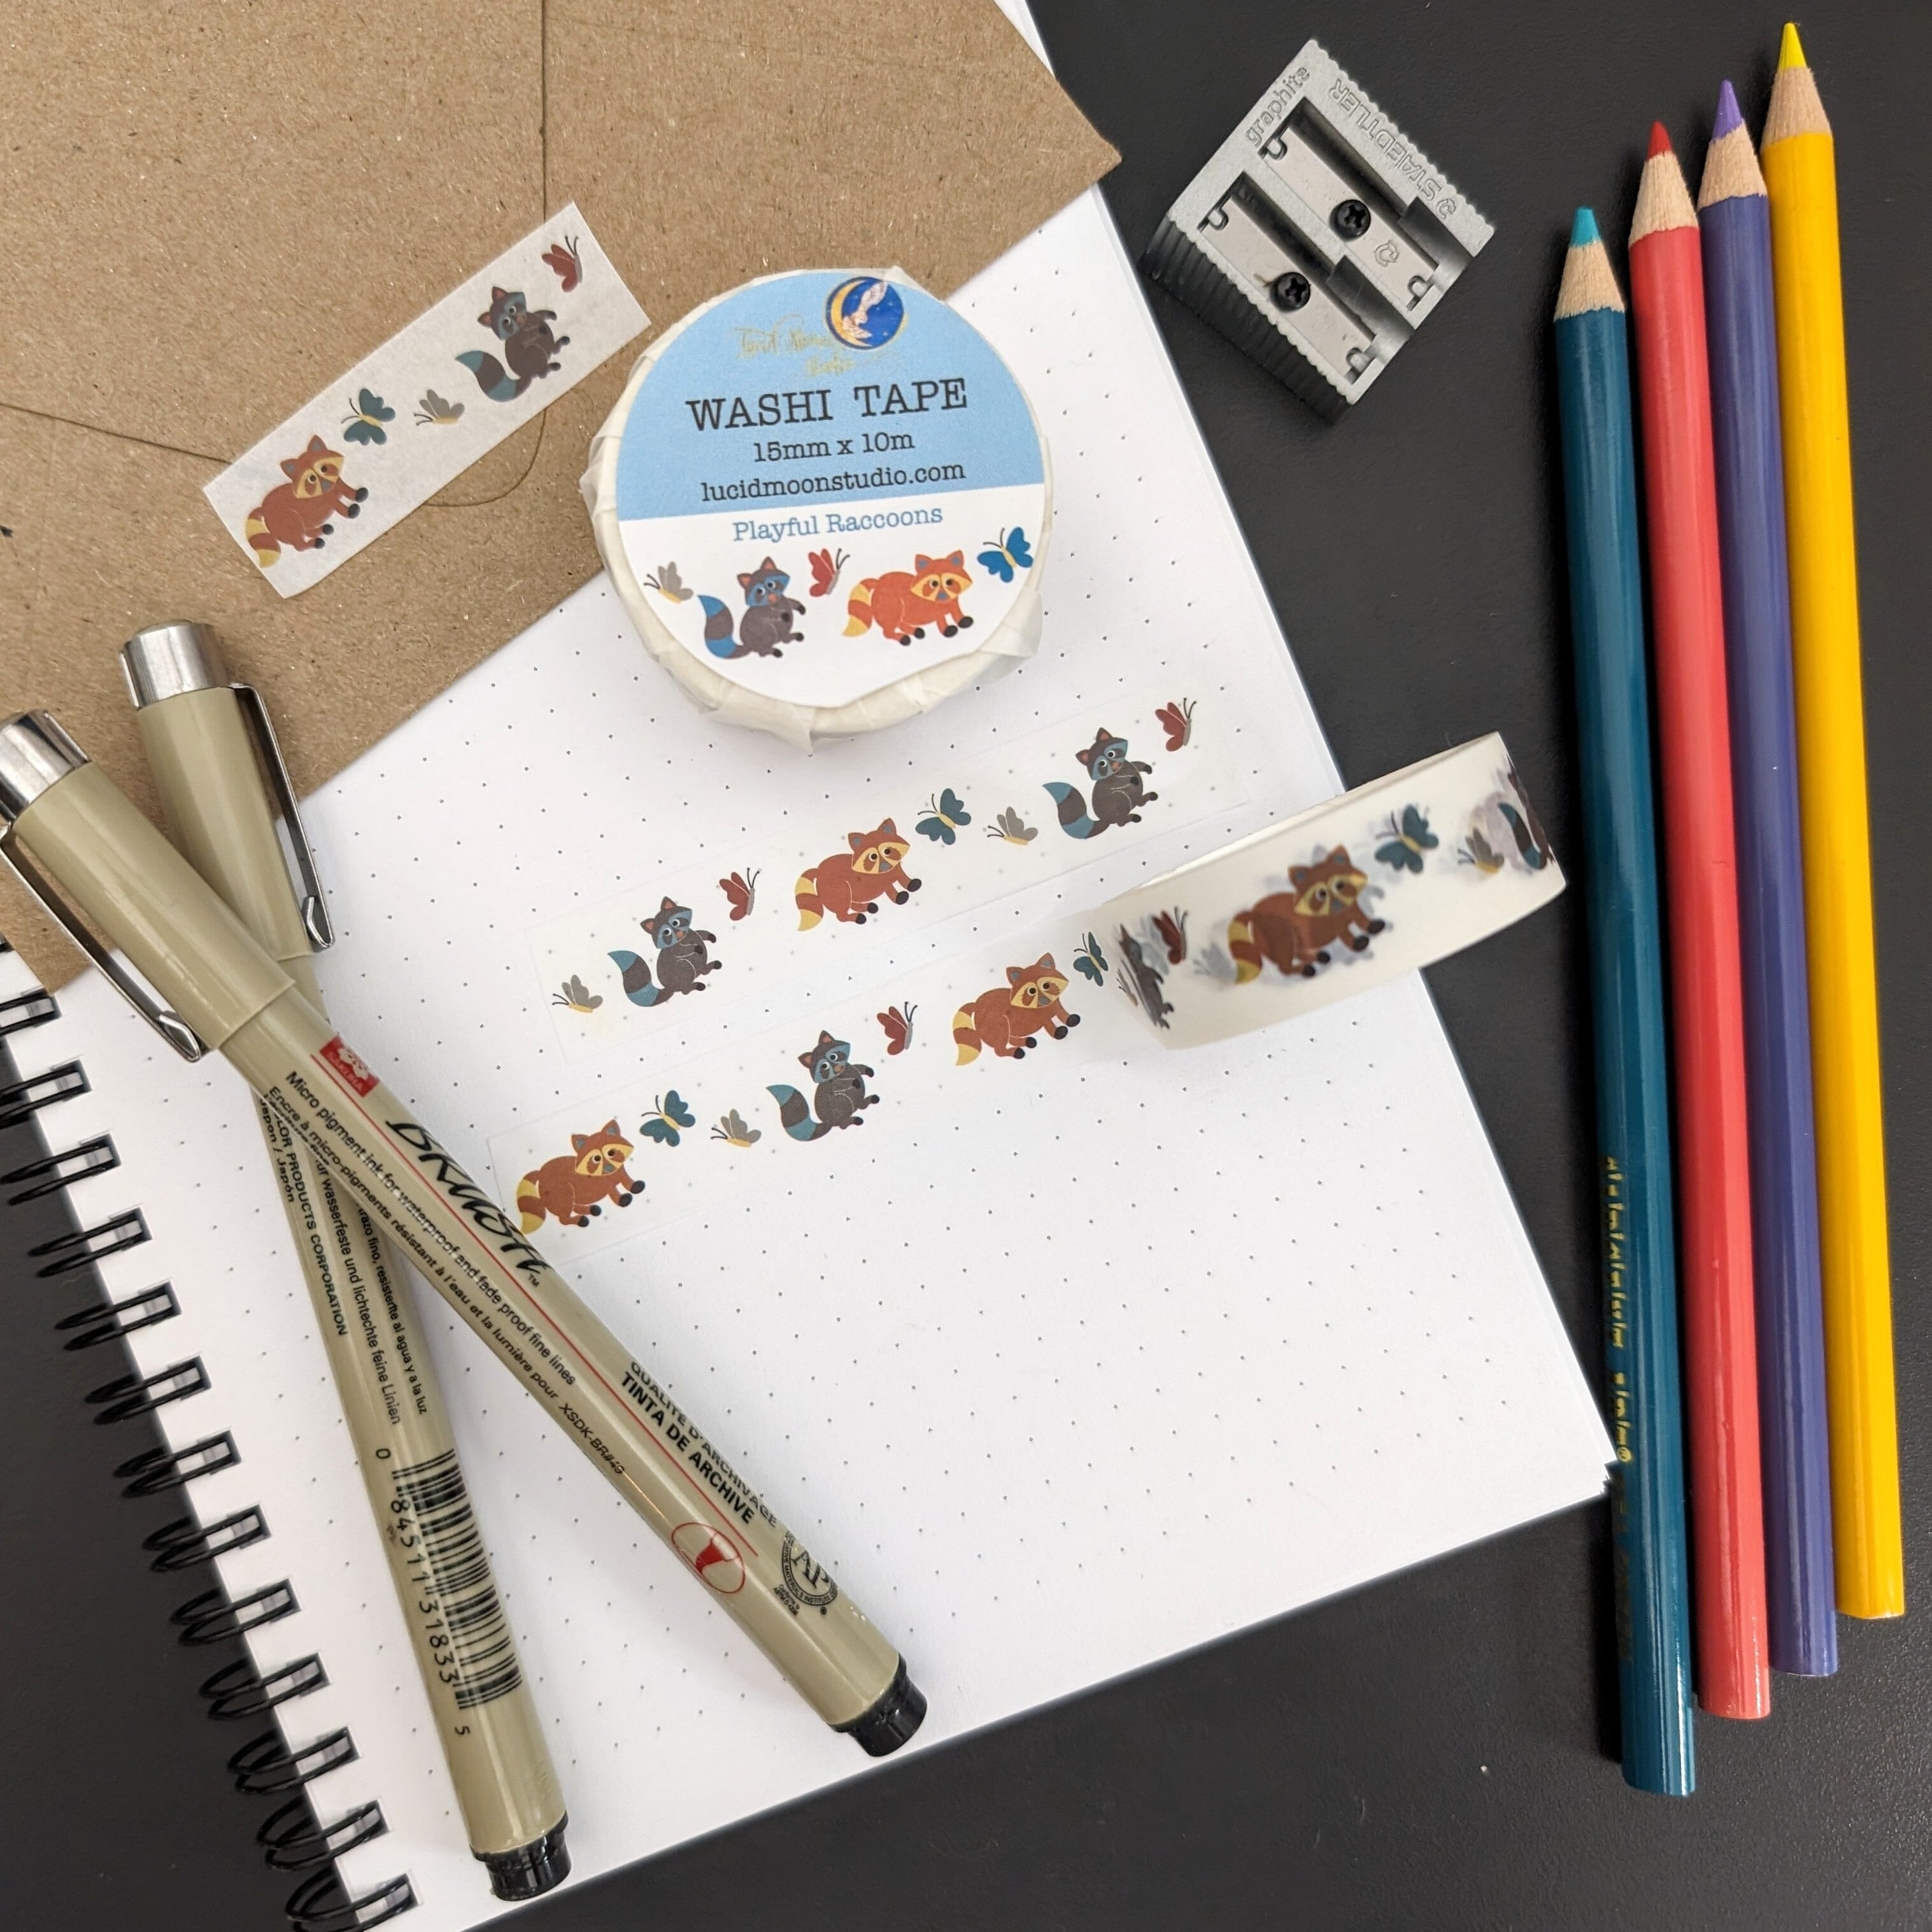 A roll of washi tape in a paper wrapper and 2 strips of washi tape adorned with hand drawn brown and gray raccoons and colorful butterflies on a white background on a notebook and kraft envelope along with pens, colored pencils, and a pencil sharpener.